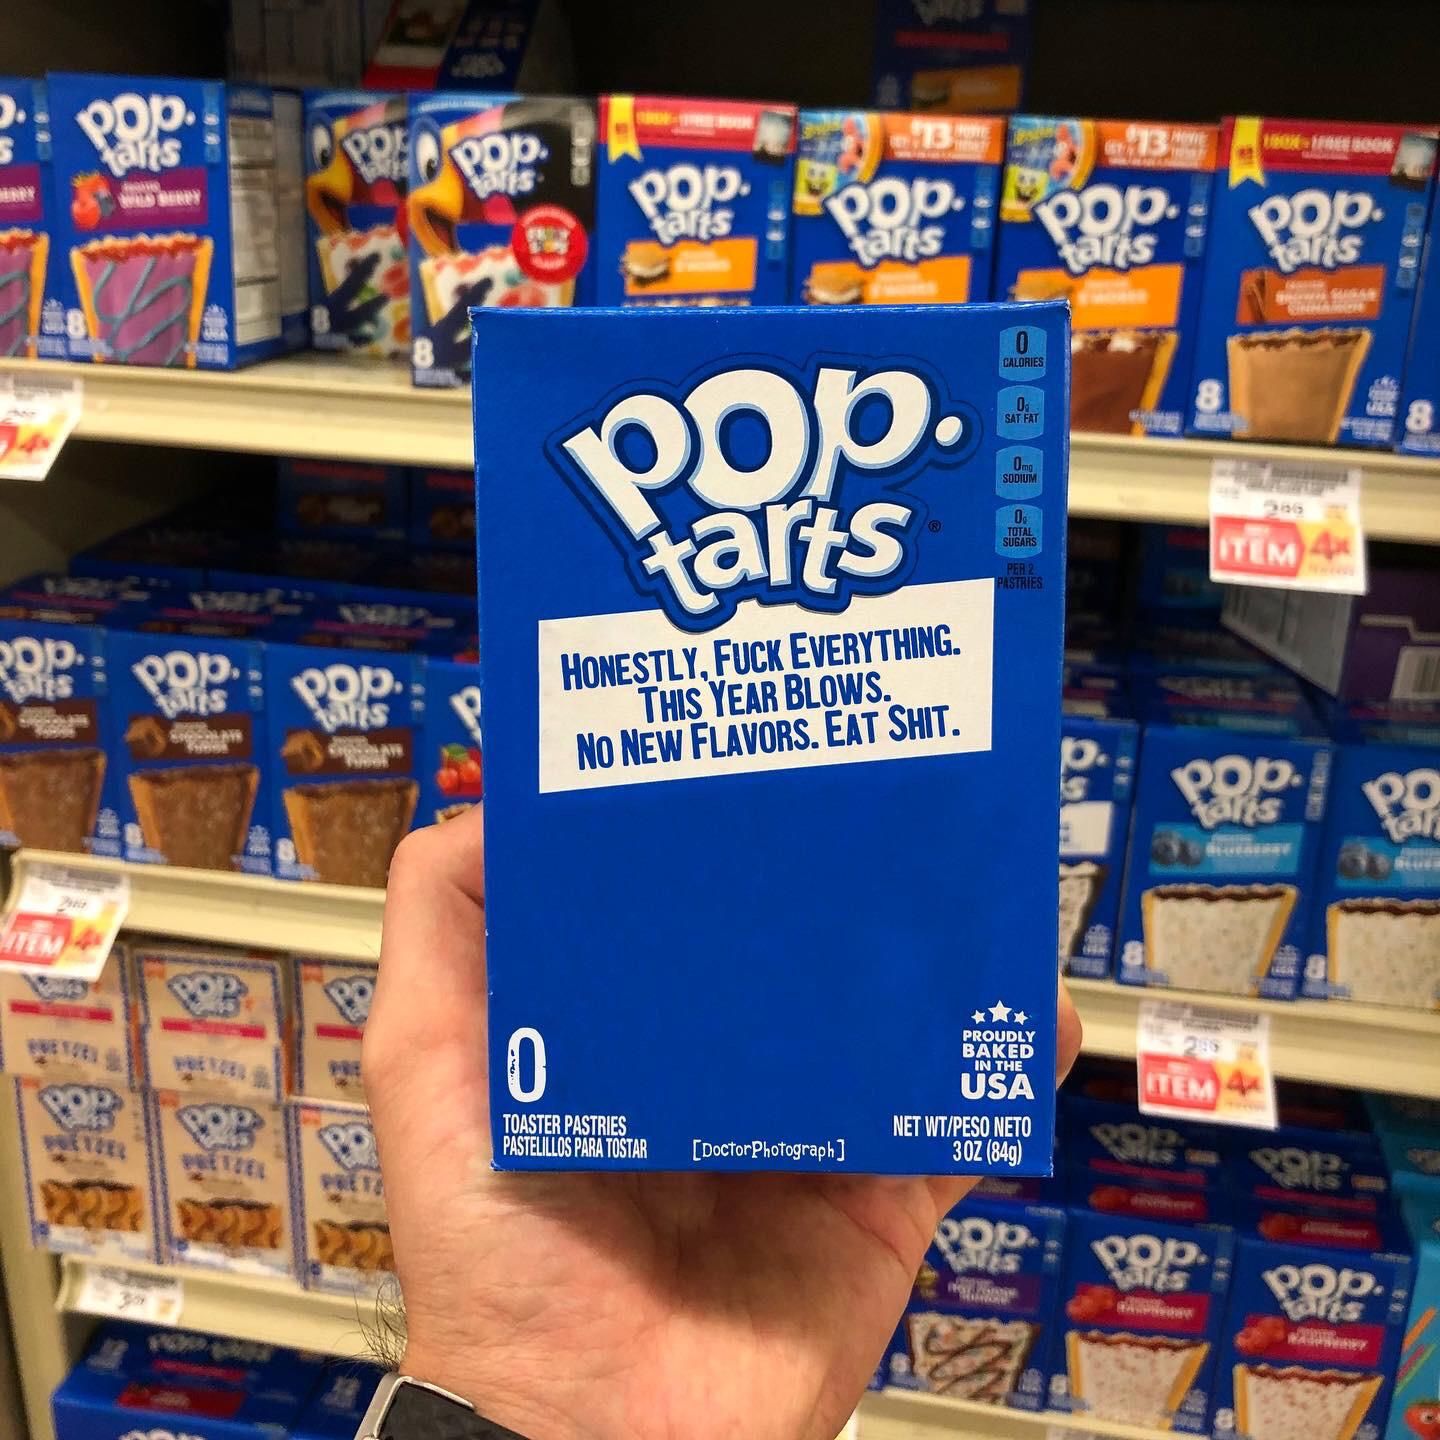 The newest “flavor” from Pop Tarts